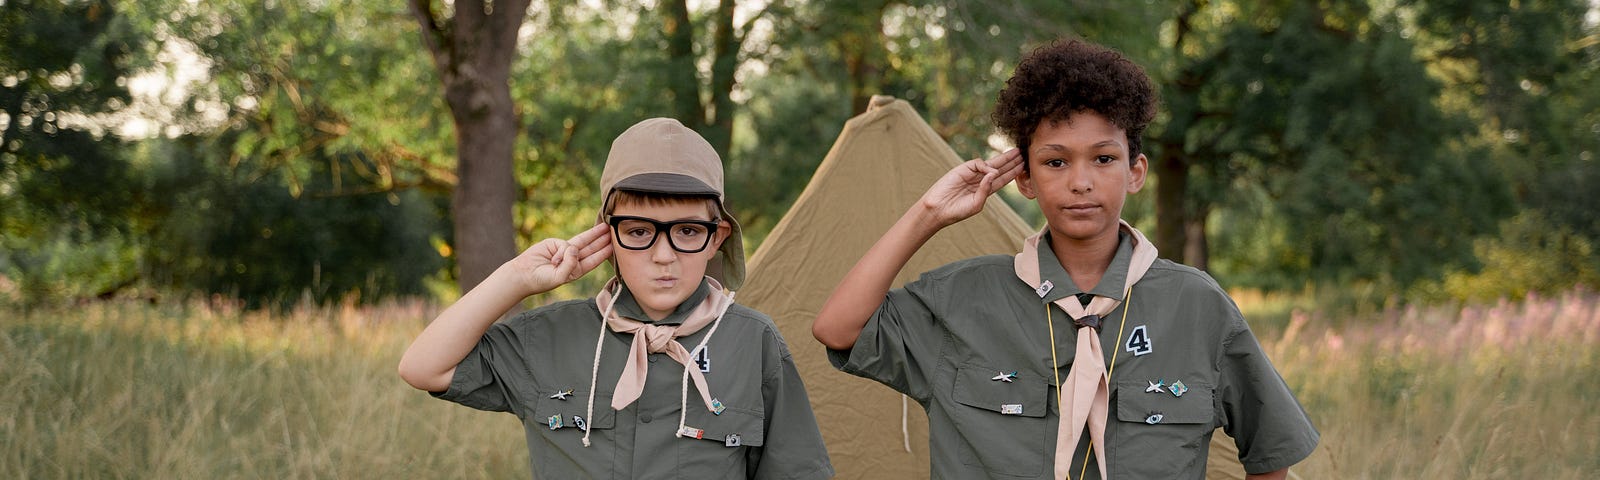 A photo of two boy scouts standing and saluting in front of their tent.